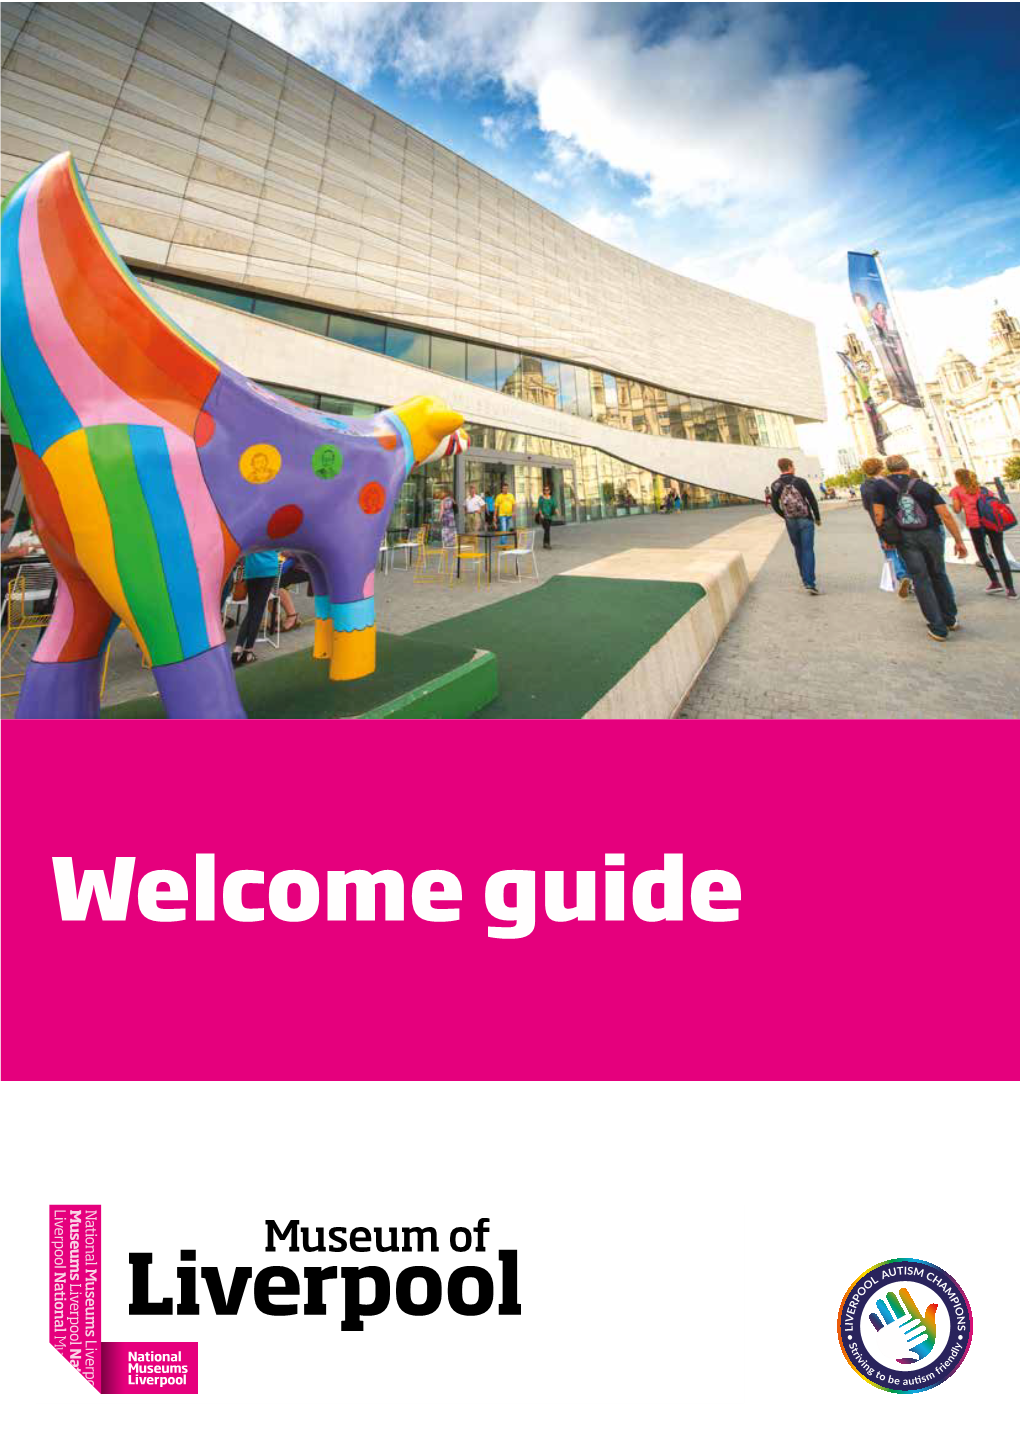 Welcome Guide to the Museum of Liverpool